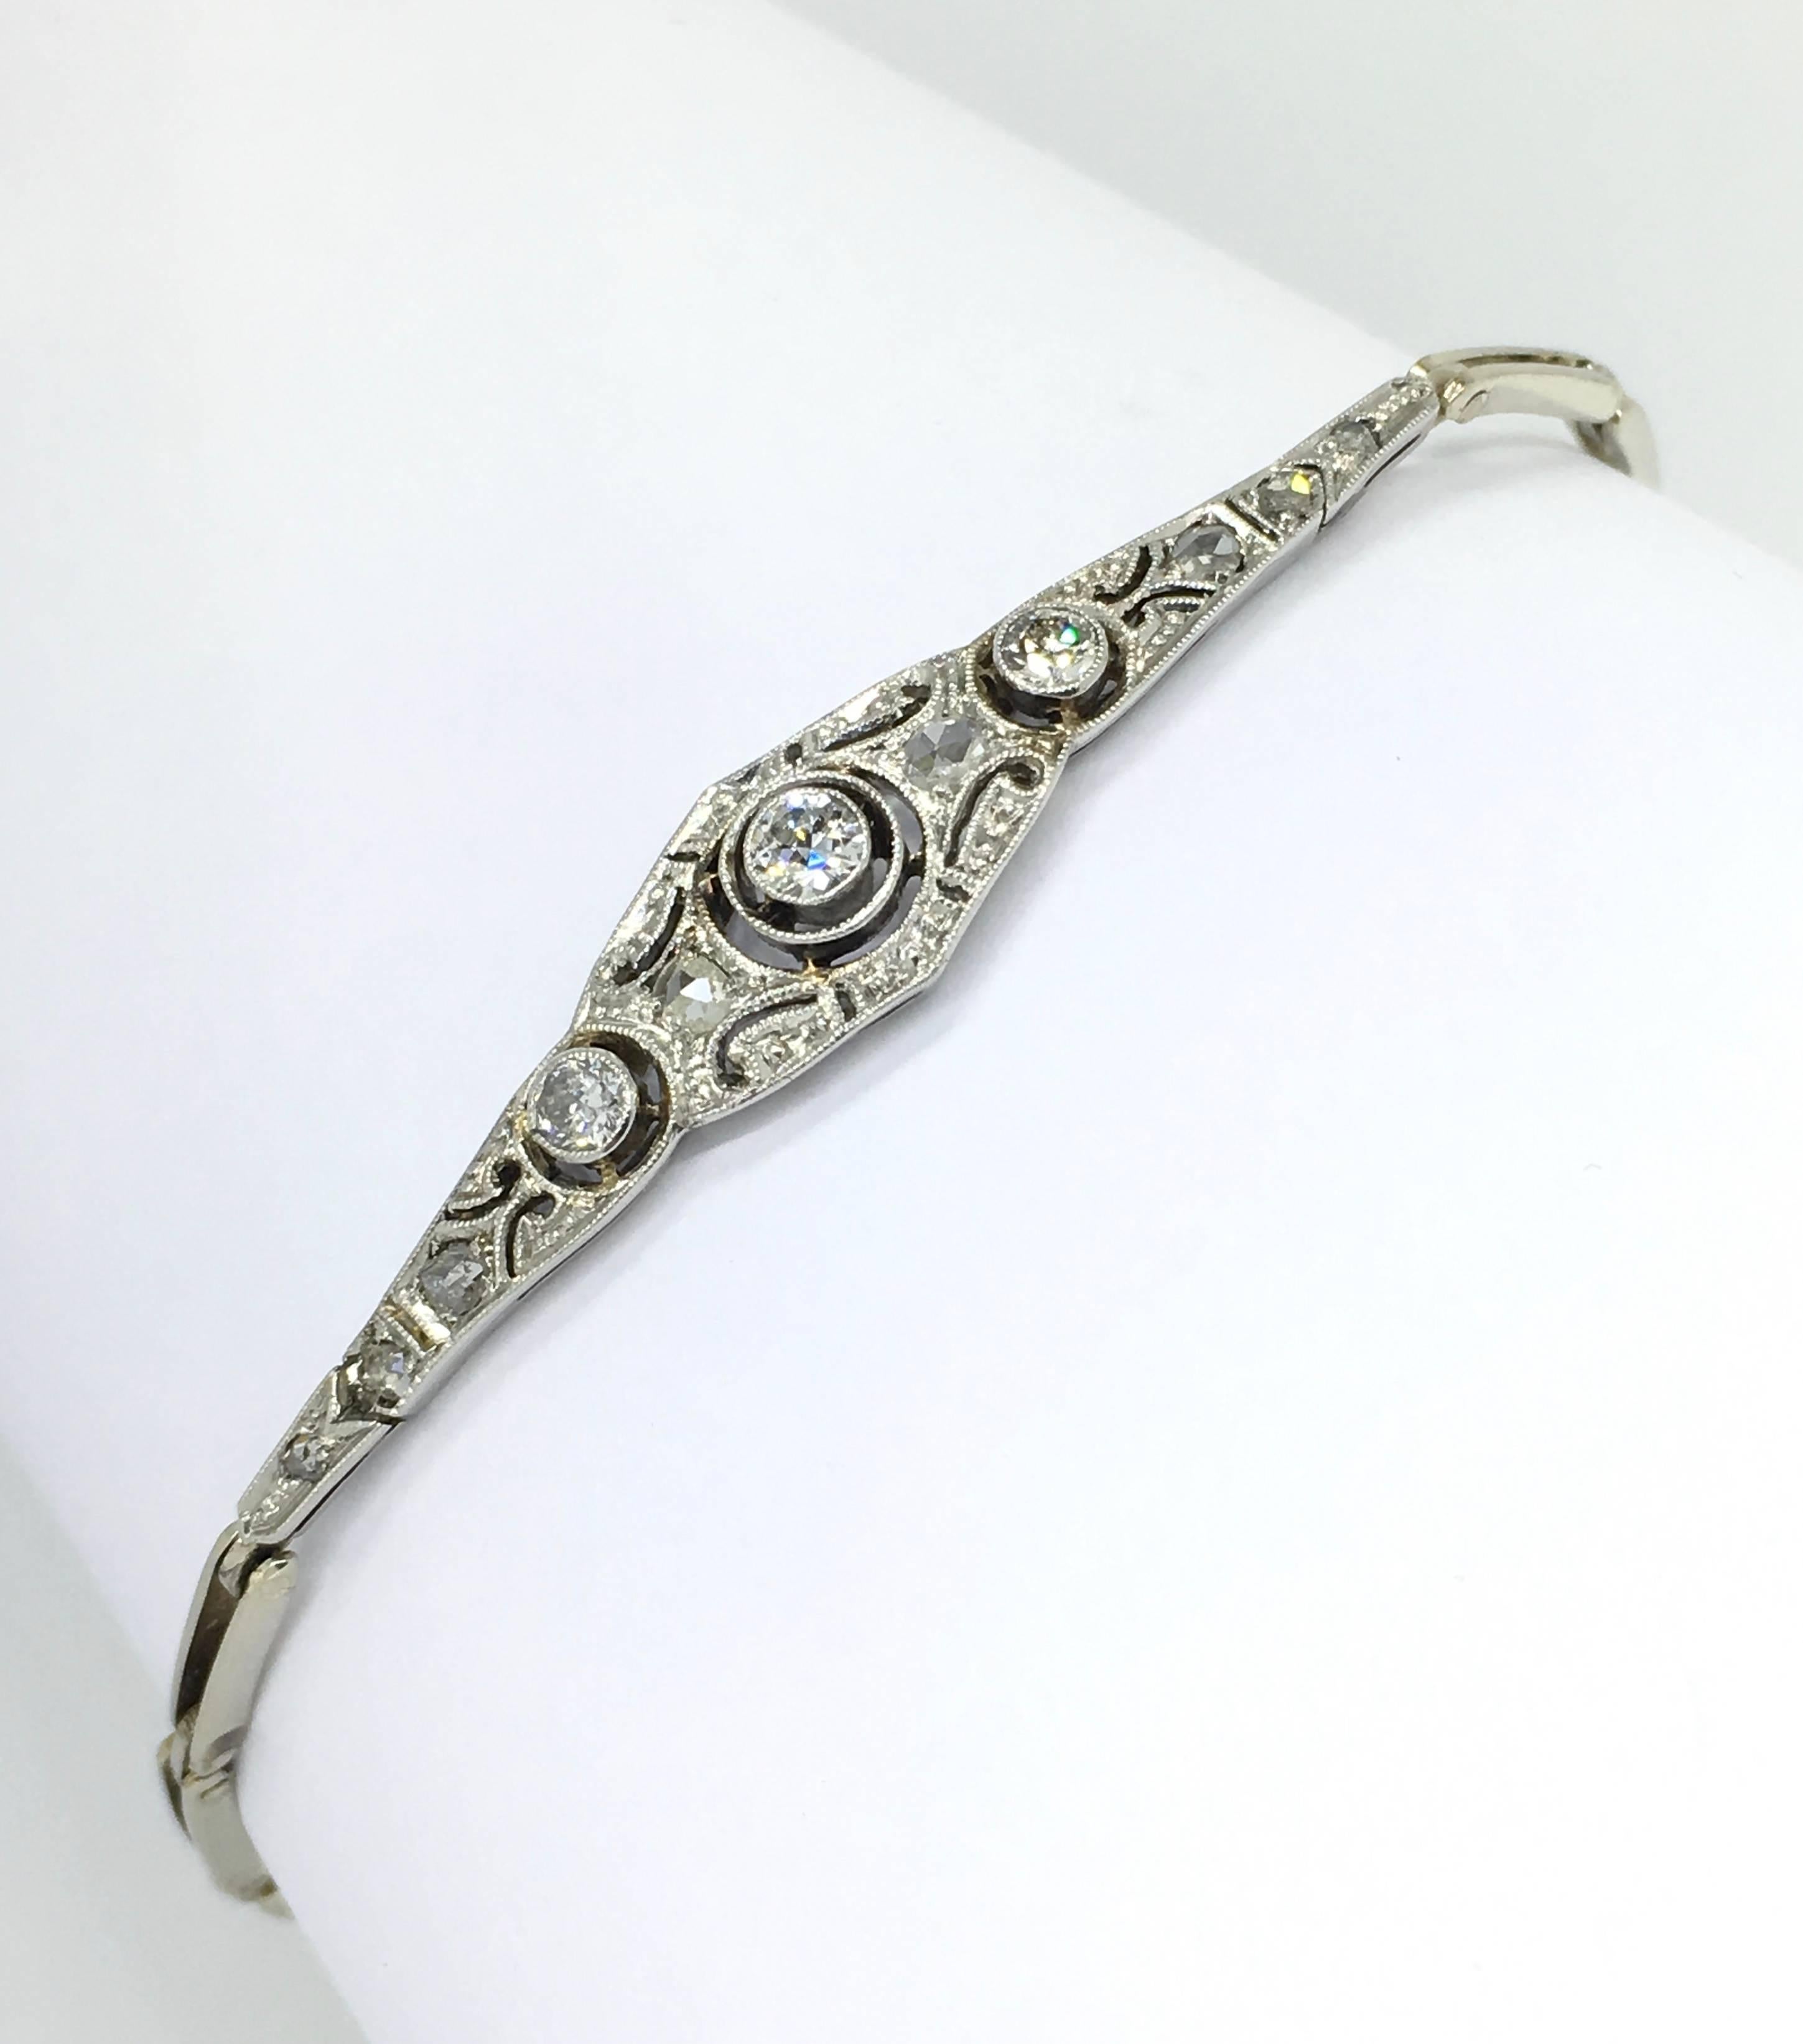 White Gold Art Deco bracelet, set with sparkling Old European and Rose Cut Diamonds. The reminded and typical Art Deco design with Millegrain decorated aplique is set with 11 diamonds.
The fine links with V spring closure and safety chain make this